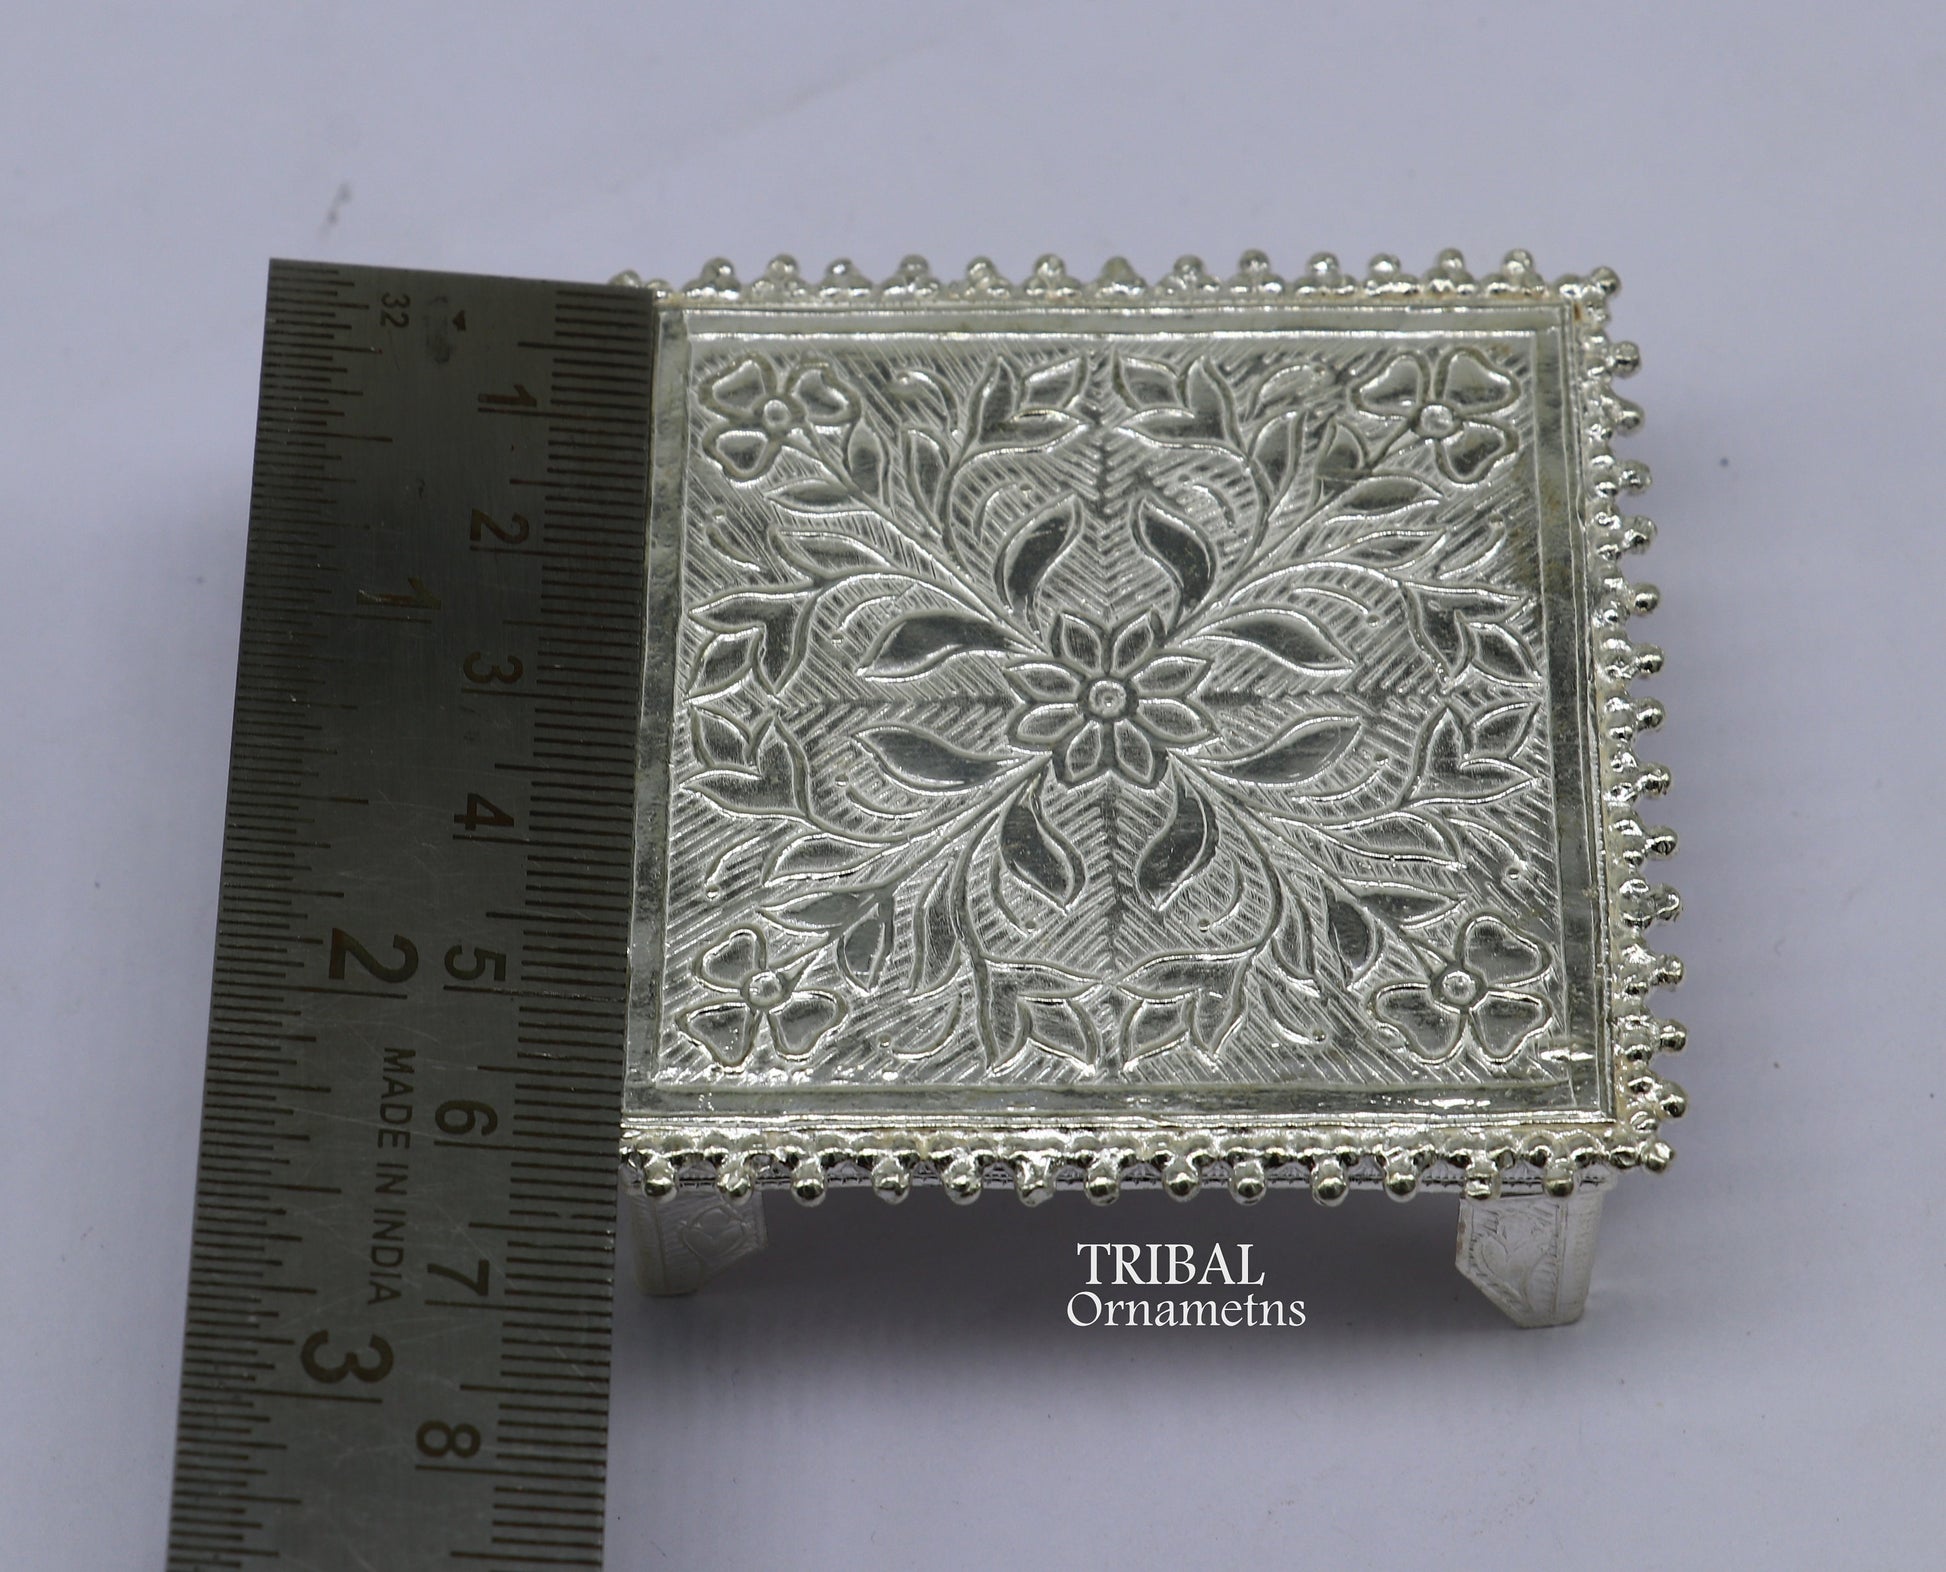 2.5" Vintage design Sterling silver handmade customize small square shape table/bazot/chouki, excellent home puja utensils temple art su951 - TRIBAL ORNAMENTS